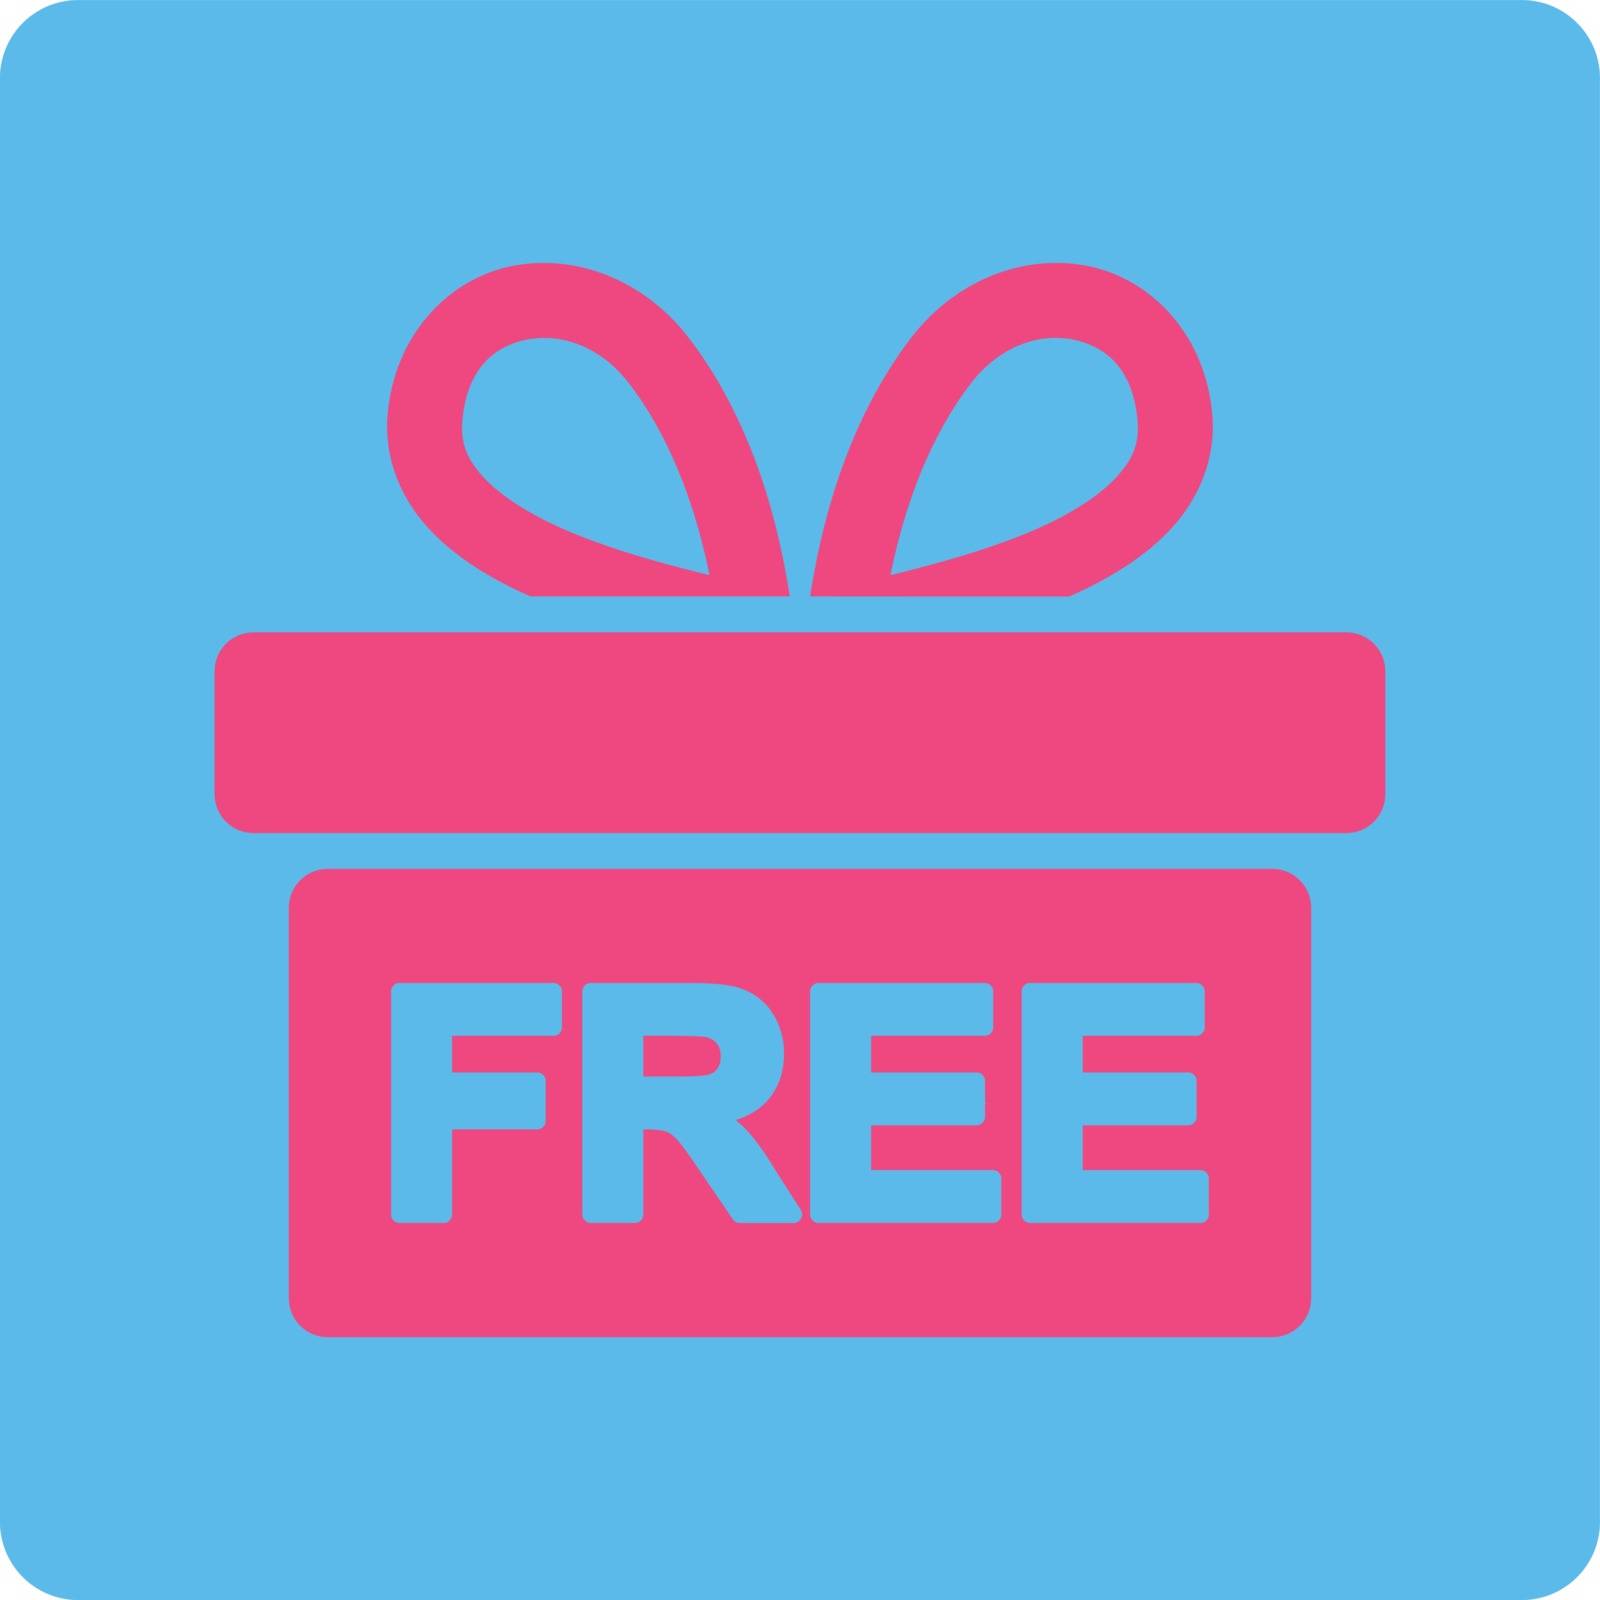 Gift icon. This flat rounded square button uses pink and blue colors and isolated on a white background.